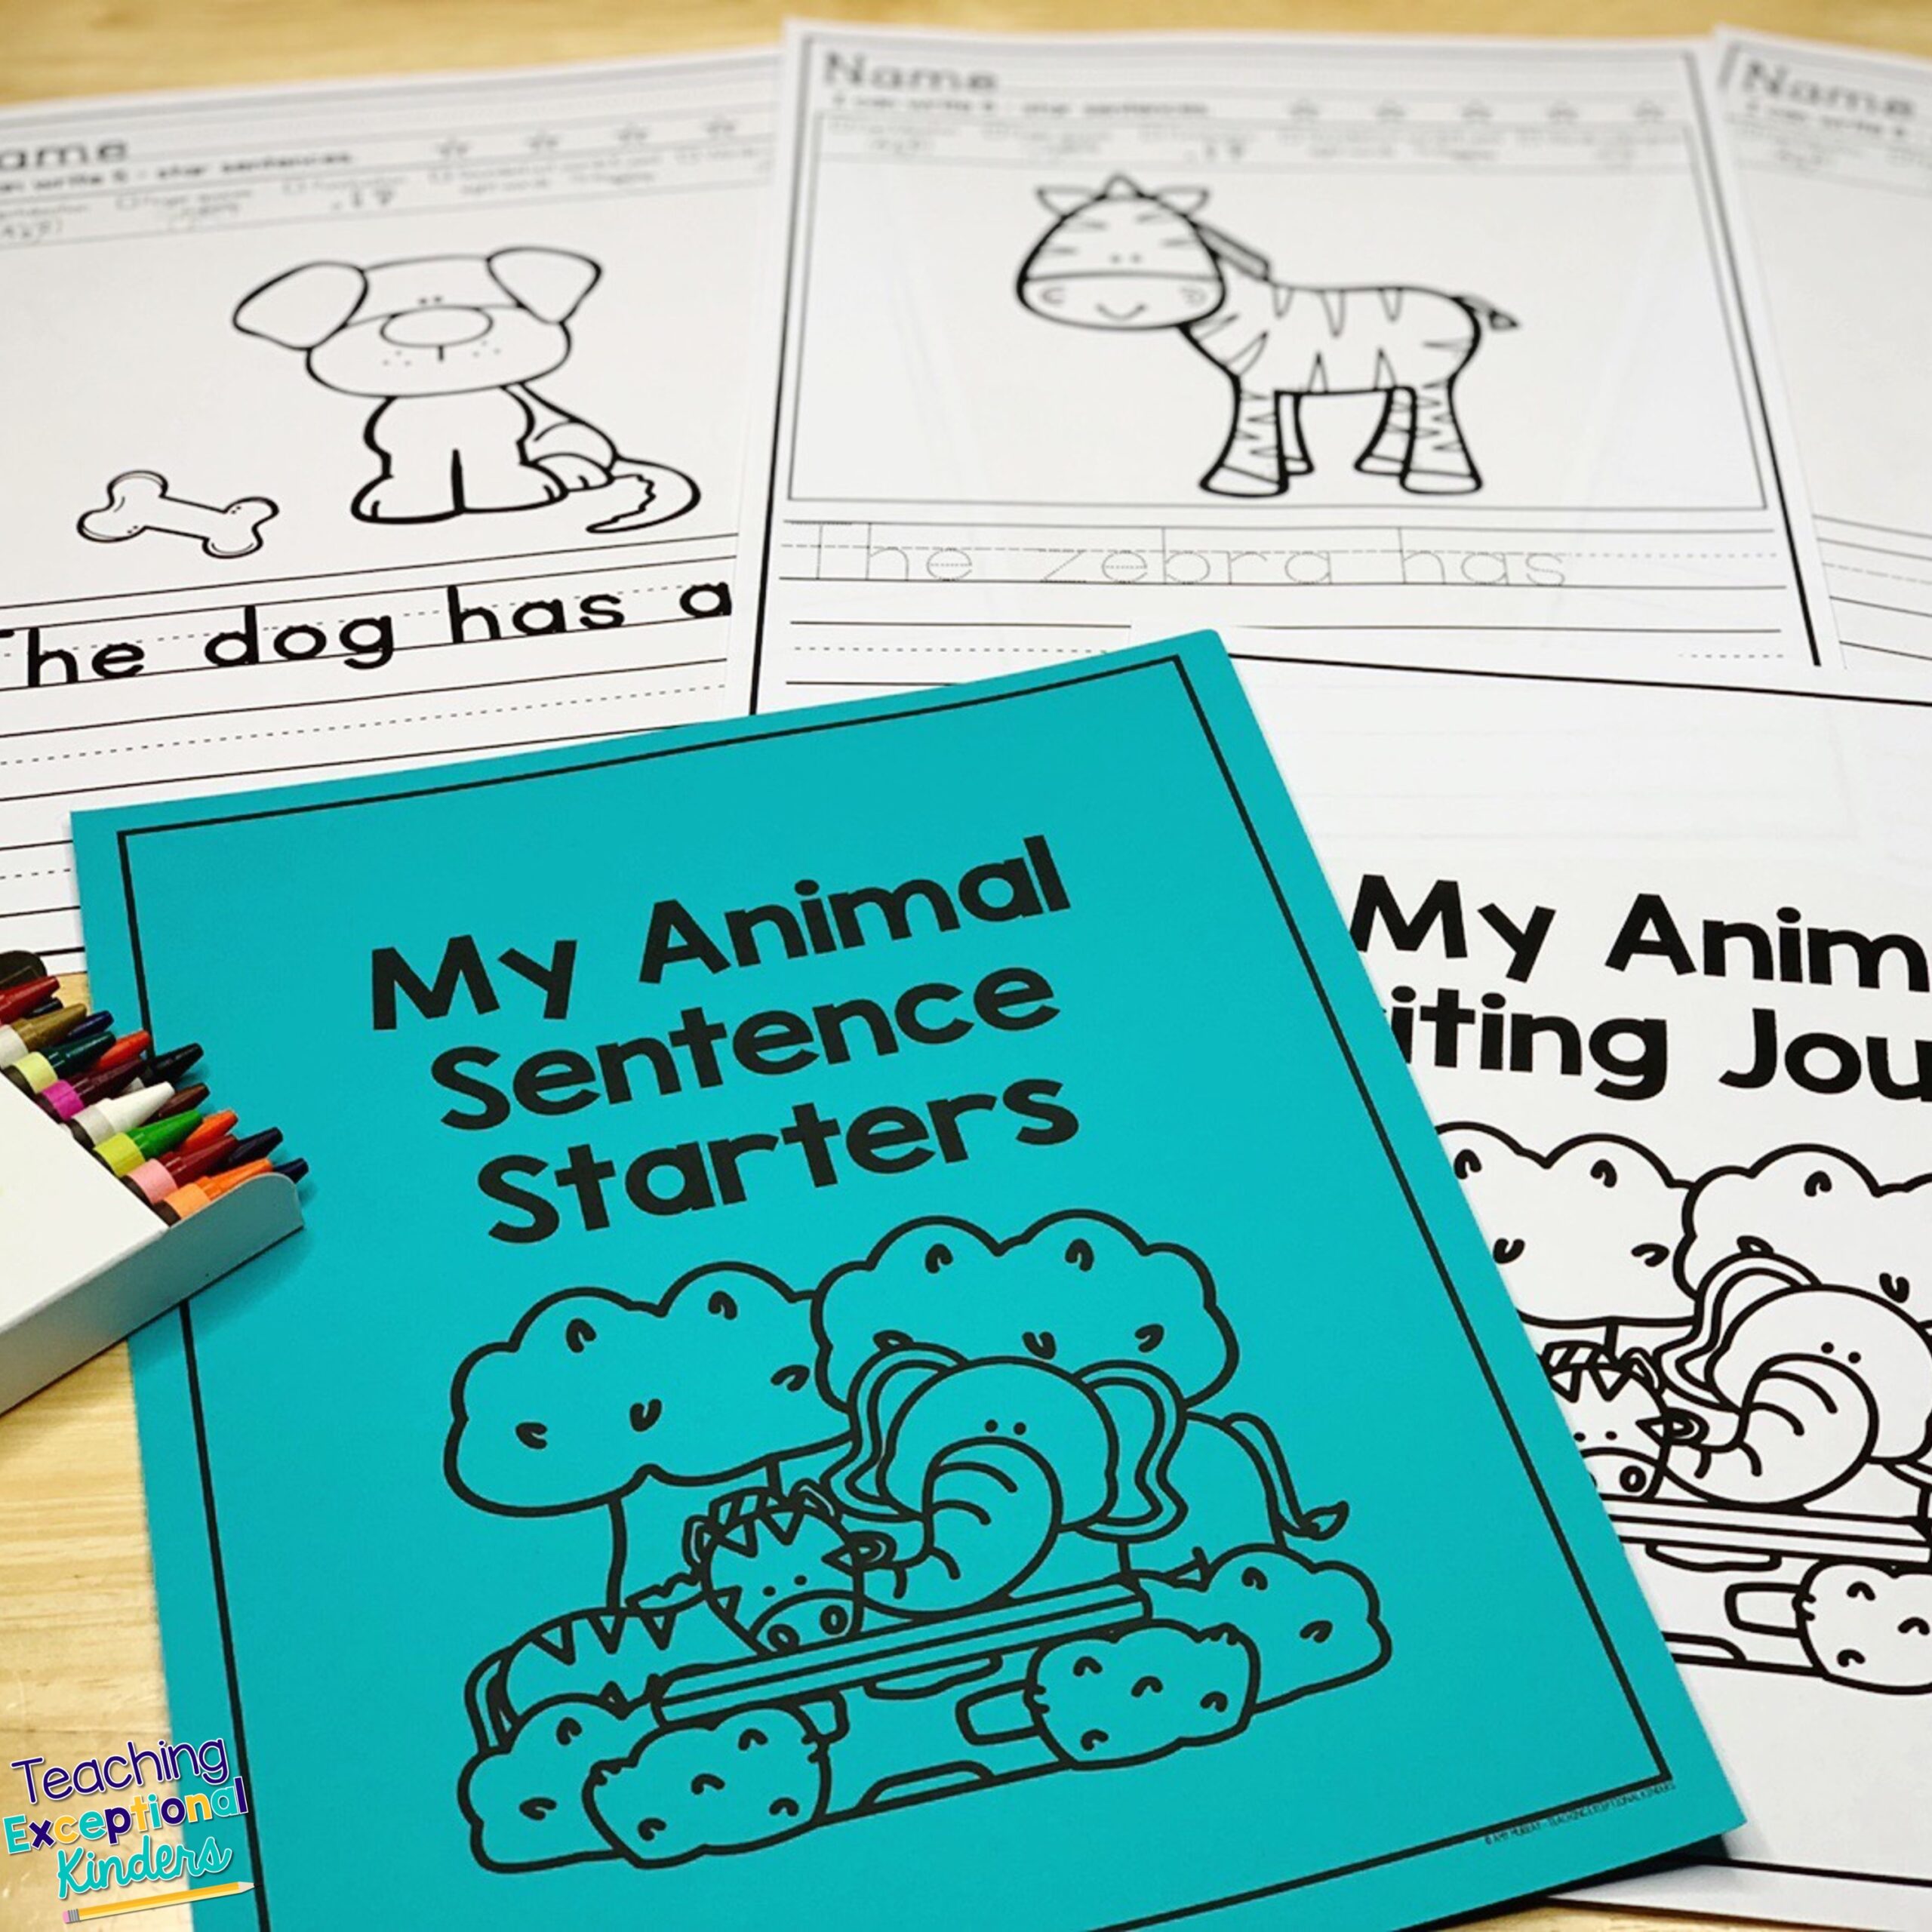 Animal sentence starters journal cover and pages